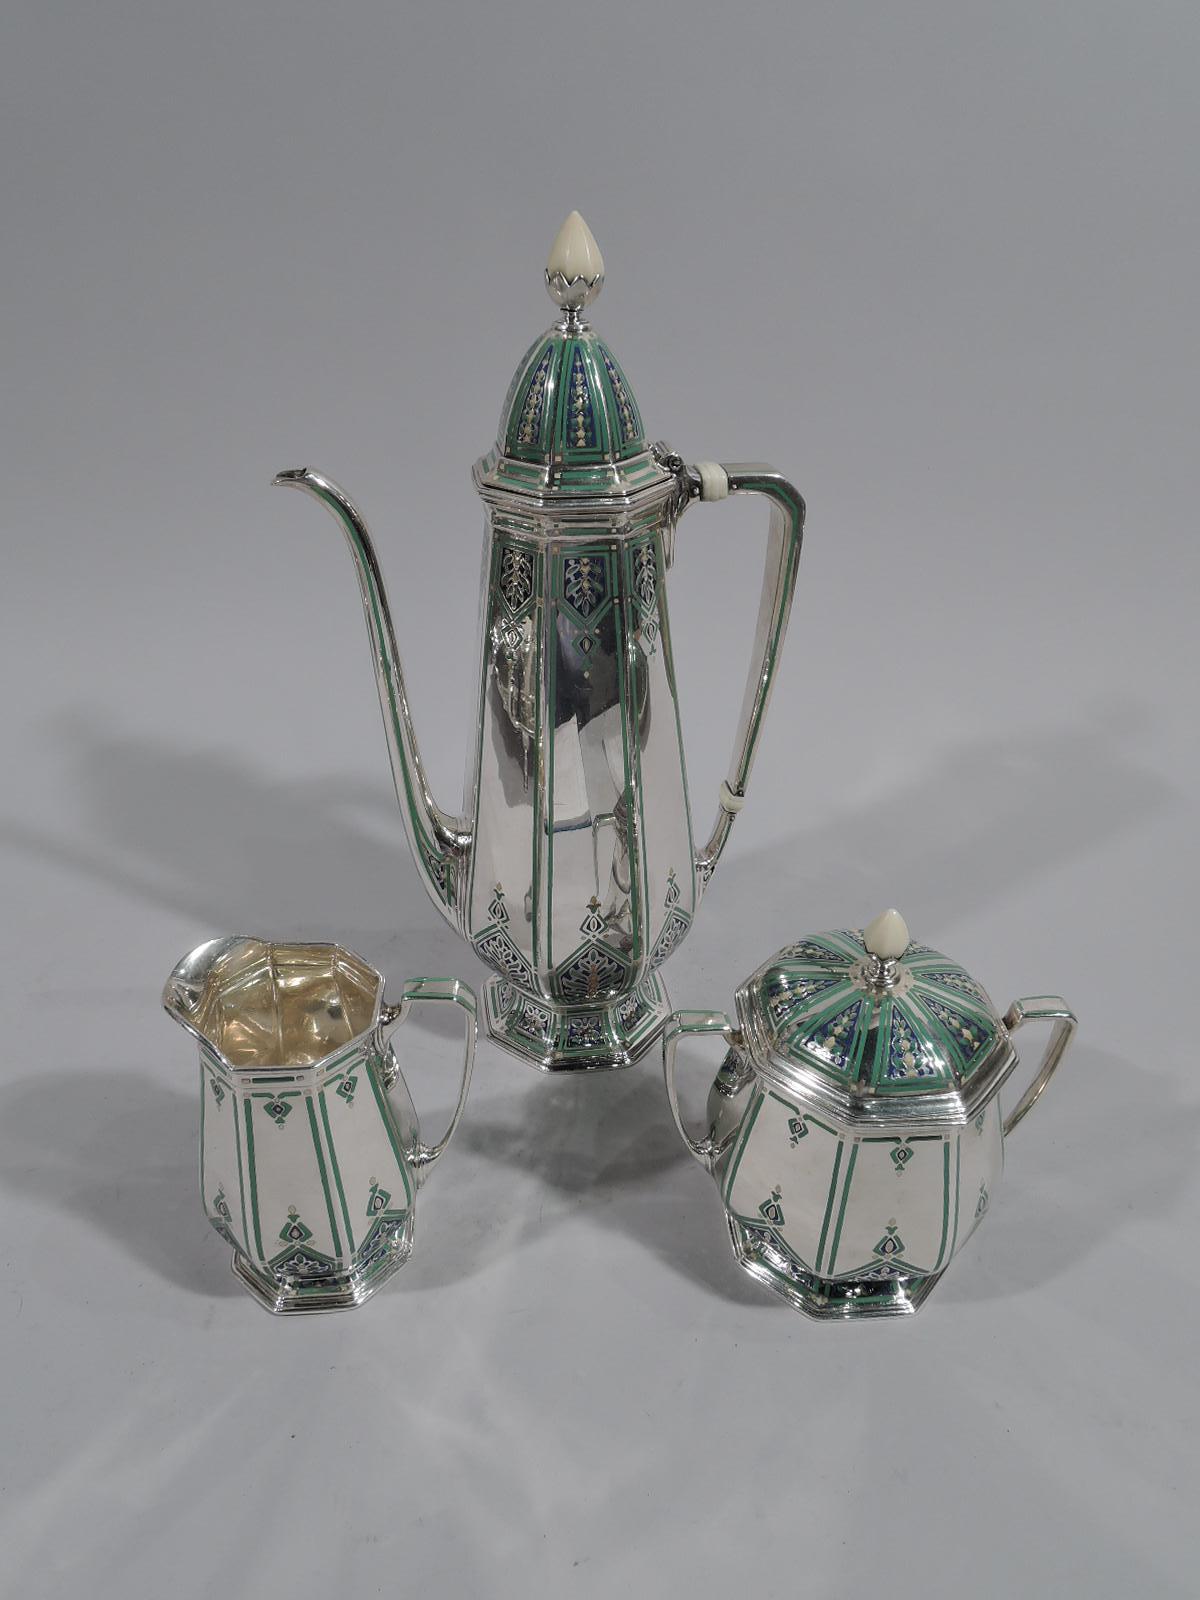 Fabulous Art Deco sterling silver coffee set on tray with enameled ornament. Made by Tiffany & Co. in New York, circa 1926. This set comprises coffeepot, creamer, sugar, and tray.

Coffeepot, creamer, and sugar have faceted baluster body, faceted,